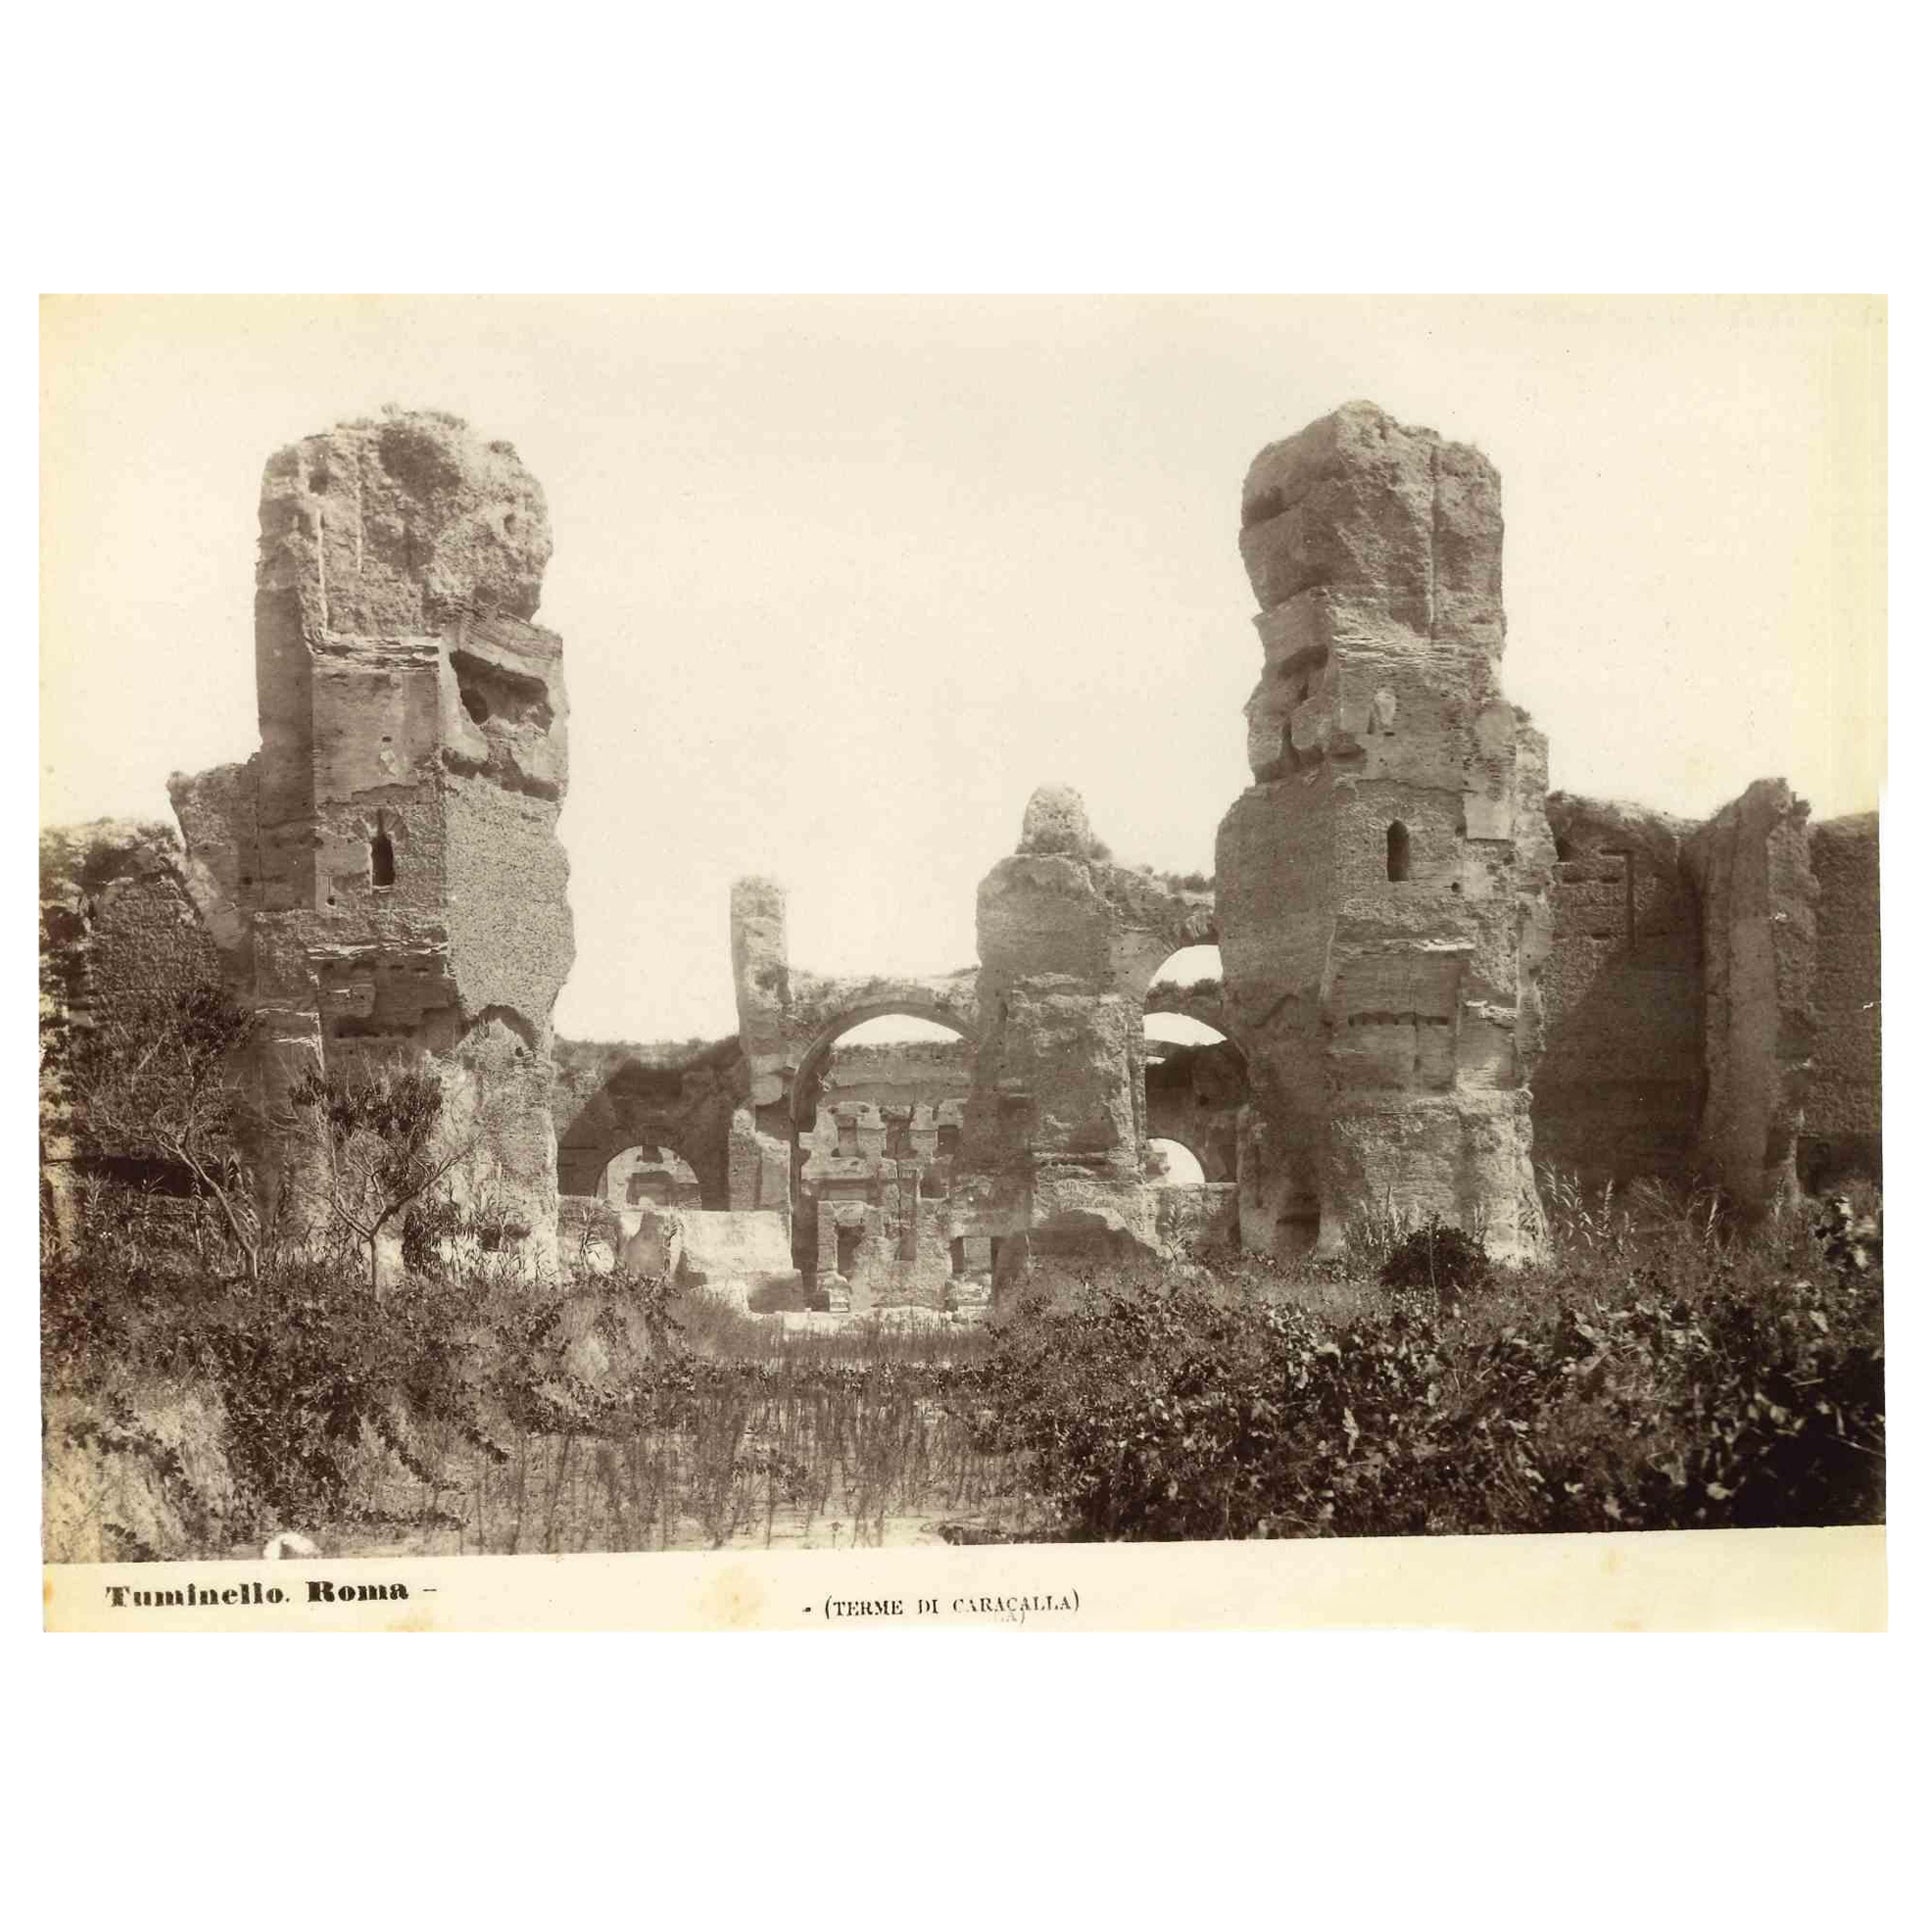 Baths of Caracalla is a vintage black and white photograph realized by an Ludovico Tuminello.

Good conditions except for some foxing.
